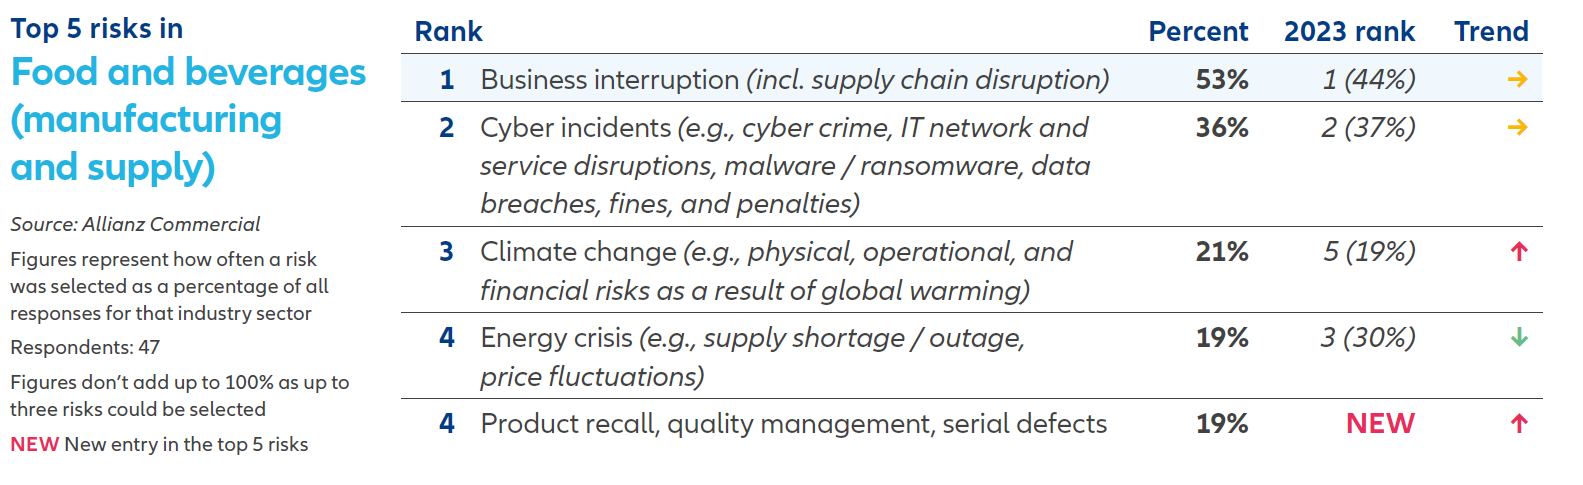 Top_5_risks_in_Food_and_beverages_manufacturing_and_supply_2024.png